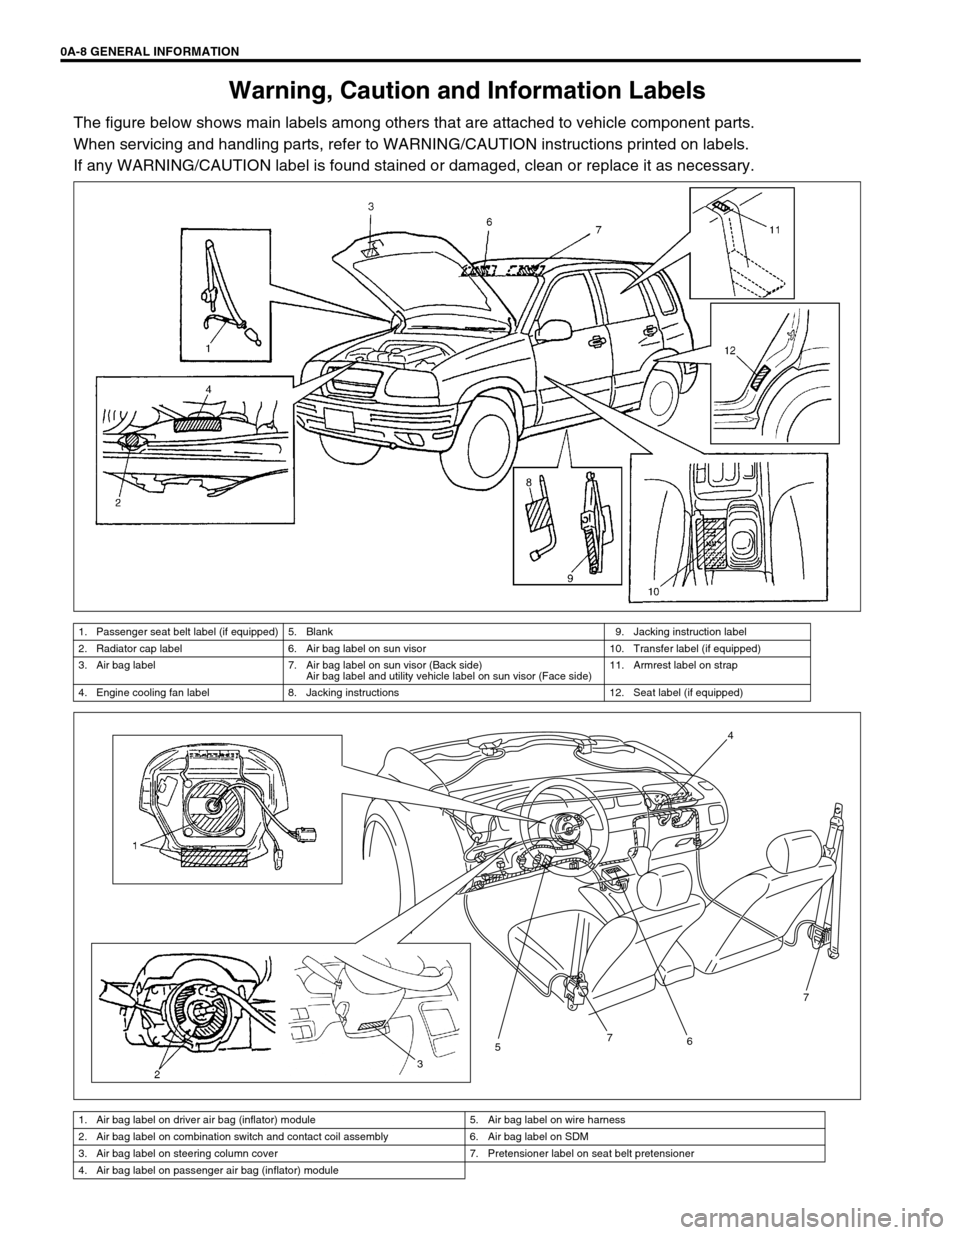 SUZUKI GRAND VITARA 1999 2.G Owners Manual 0A-8 GENERAL INFORMATION
Warning, Caution and Information Labels
The figure below shows main labels among others that are attached to vehicle component parts.
When servicing and handling parts, refer 